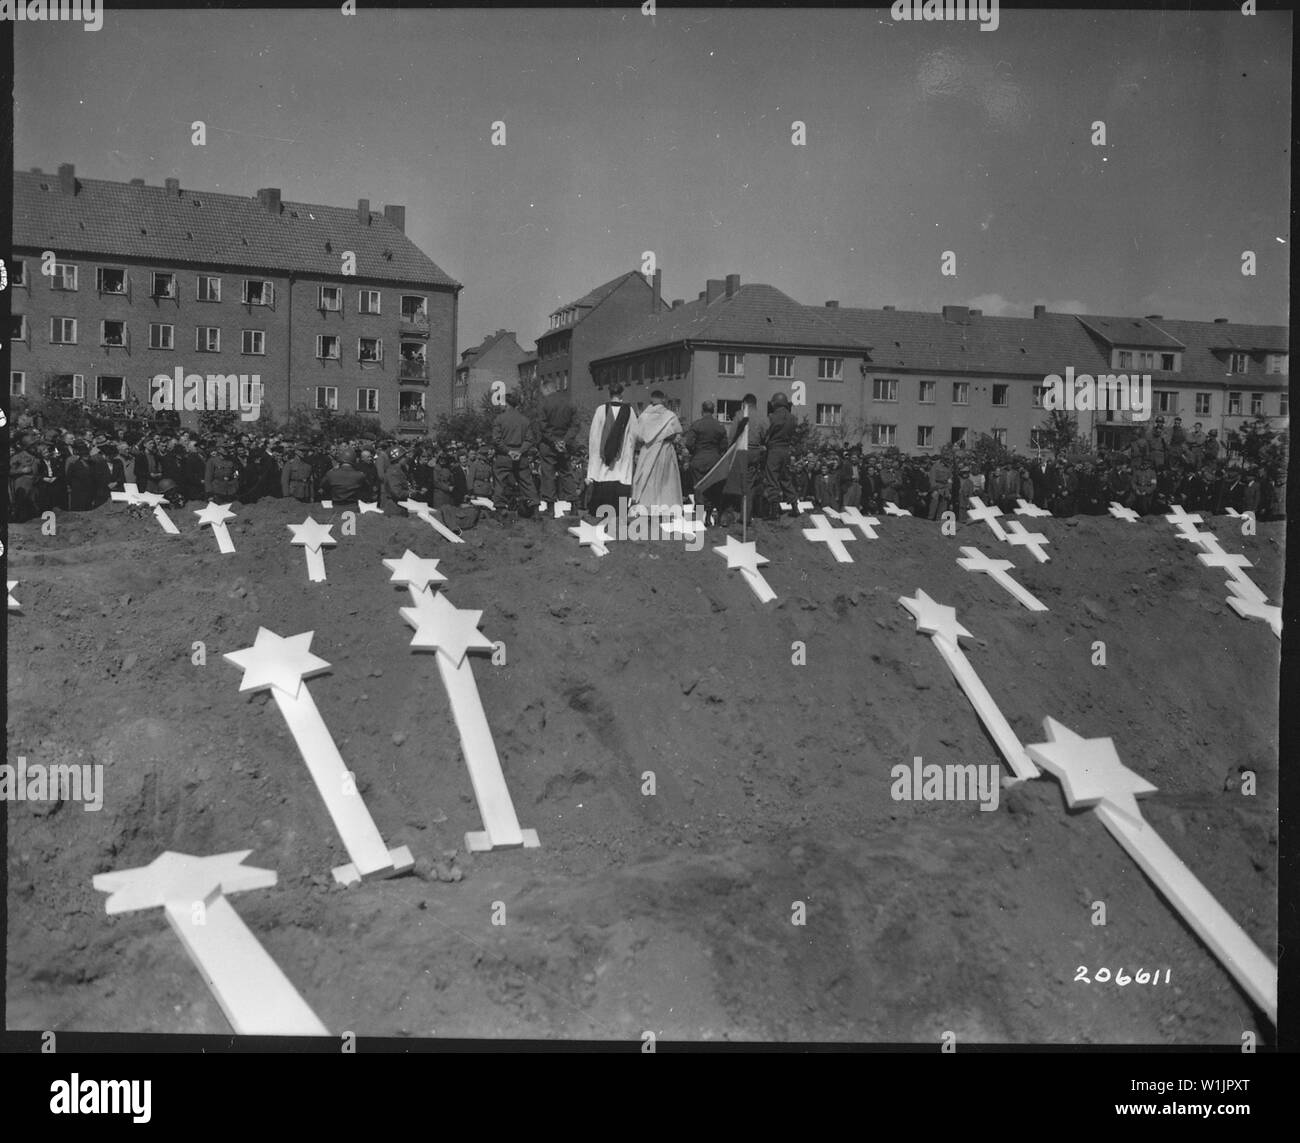 These markers are for the graves of 80 victims of the Nazis found in Ludwigslust. The entire population of Schwerin, Germany, was ordered by the Military Government to attend funeral rites conducted by U.S. Army chaplains.; General notes:  Use War and Conflict Number 1128 when ordering a reproduction or requesting information about this image. Stock Photo